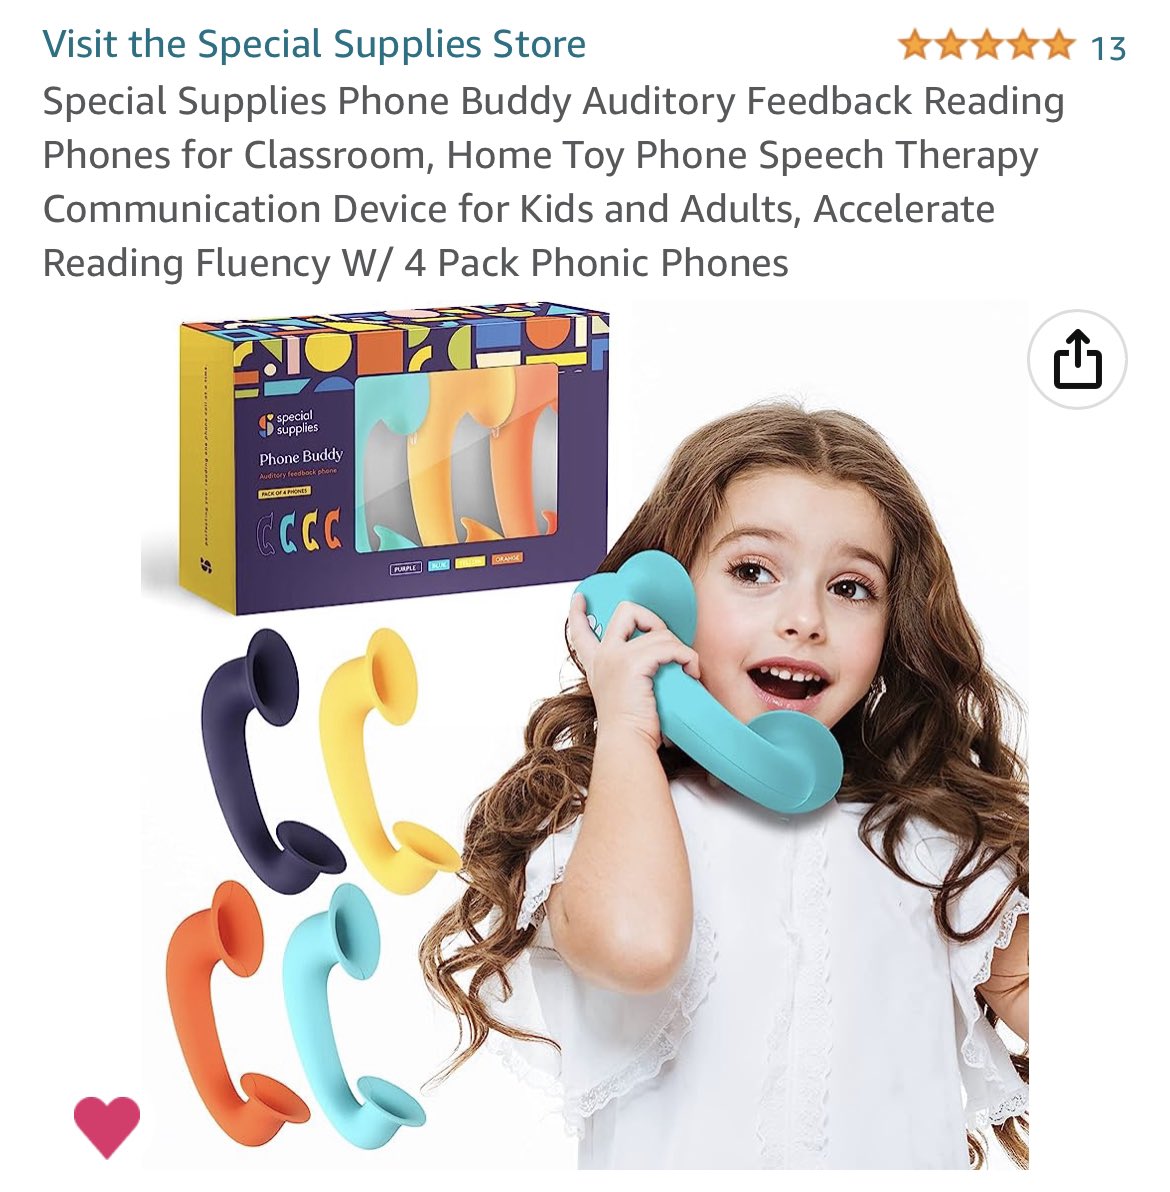 Fluency & #speech clarity are important factors in #EarlyLiteracy. Any #BookLover out there care to share our wish for whisper phones to add to our classroom #library?🤗

amazon.com/hz/wishlist/ls…

#LiteracyIsEquity #LearntoRead #teachersoftwitter